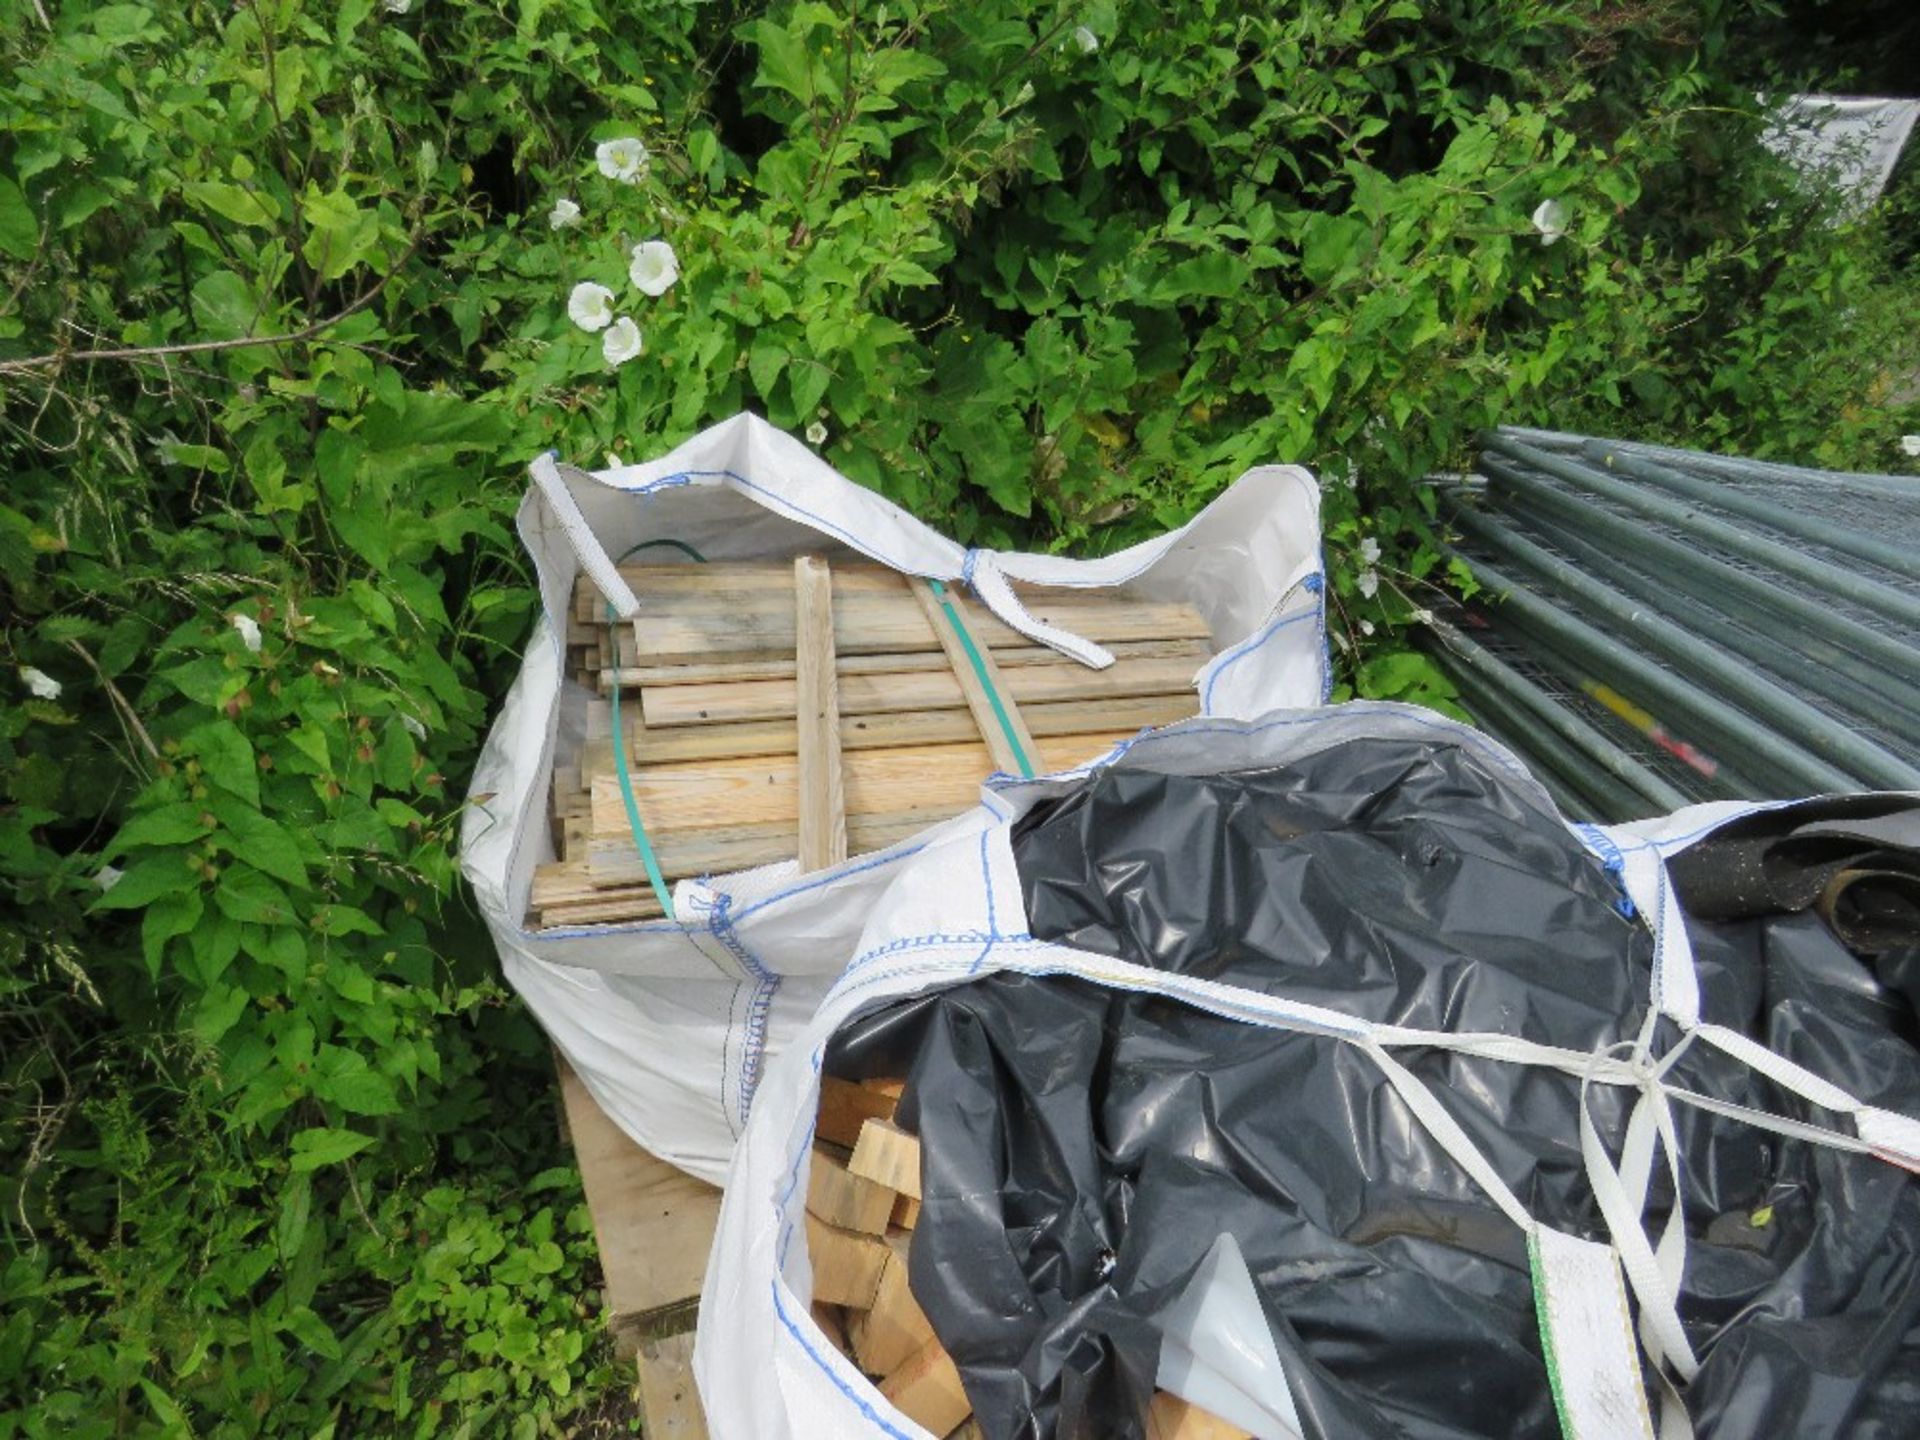 4 X BULK BAGS OF WOOD OFFCUTS, SUITABLE FOR FIRE WOOD. - Image 3 of 3